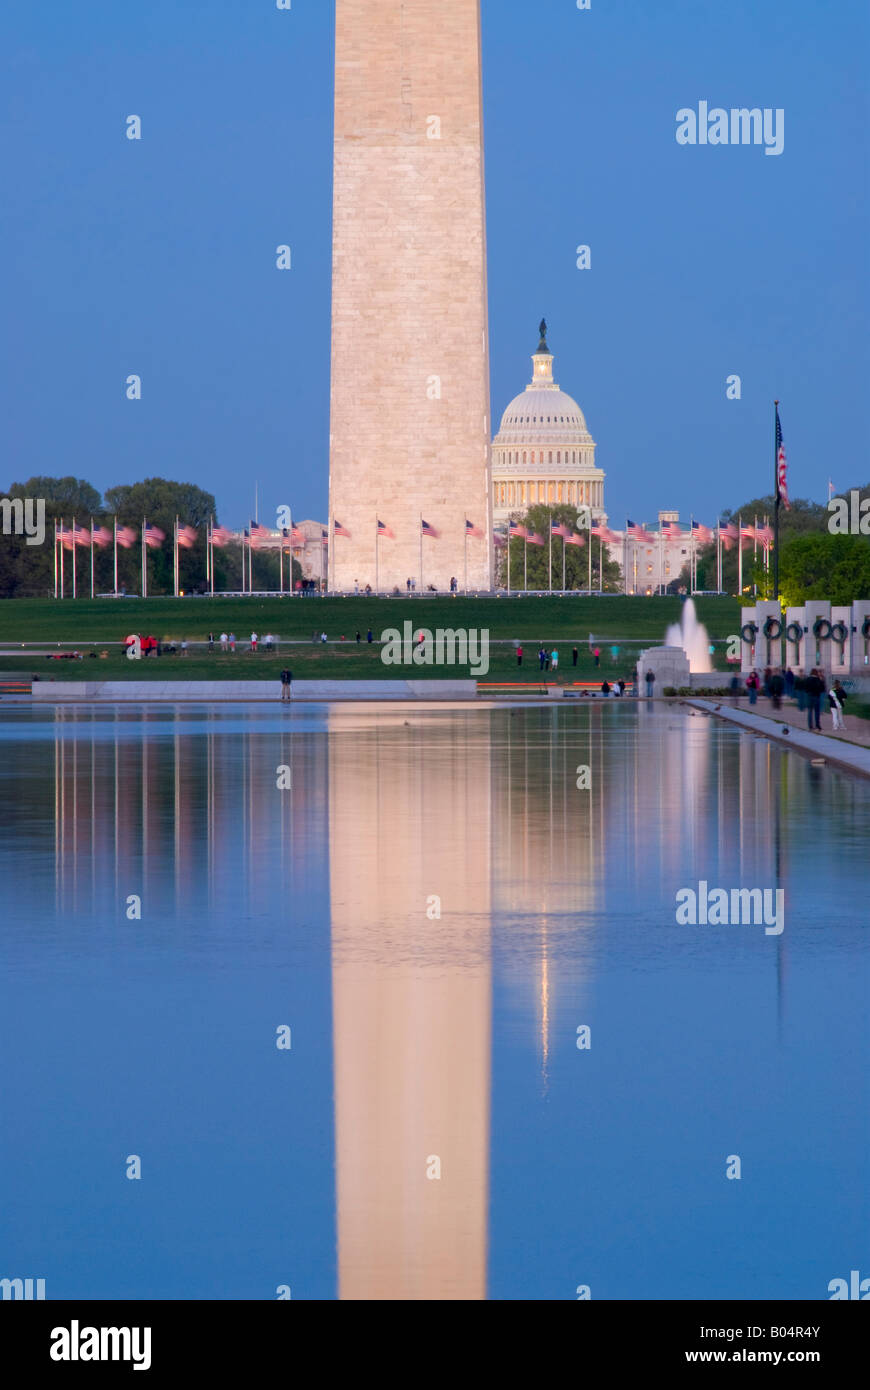 WASHINGTON DC, USA - Washington Monument at night with reflection on the Reflecting Pool and the US Capitol Building in the distance. Stock Photo